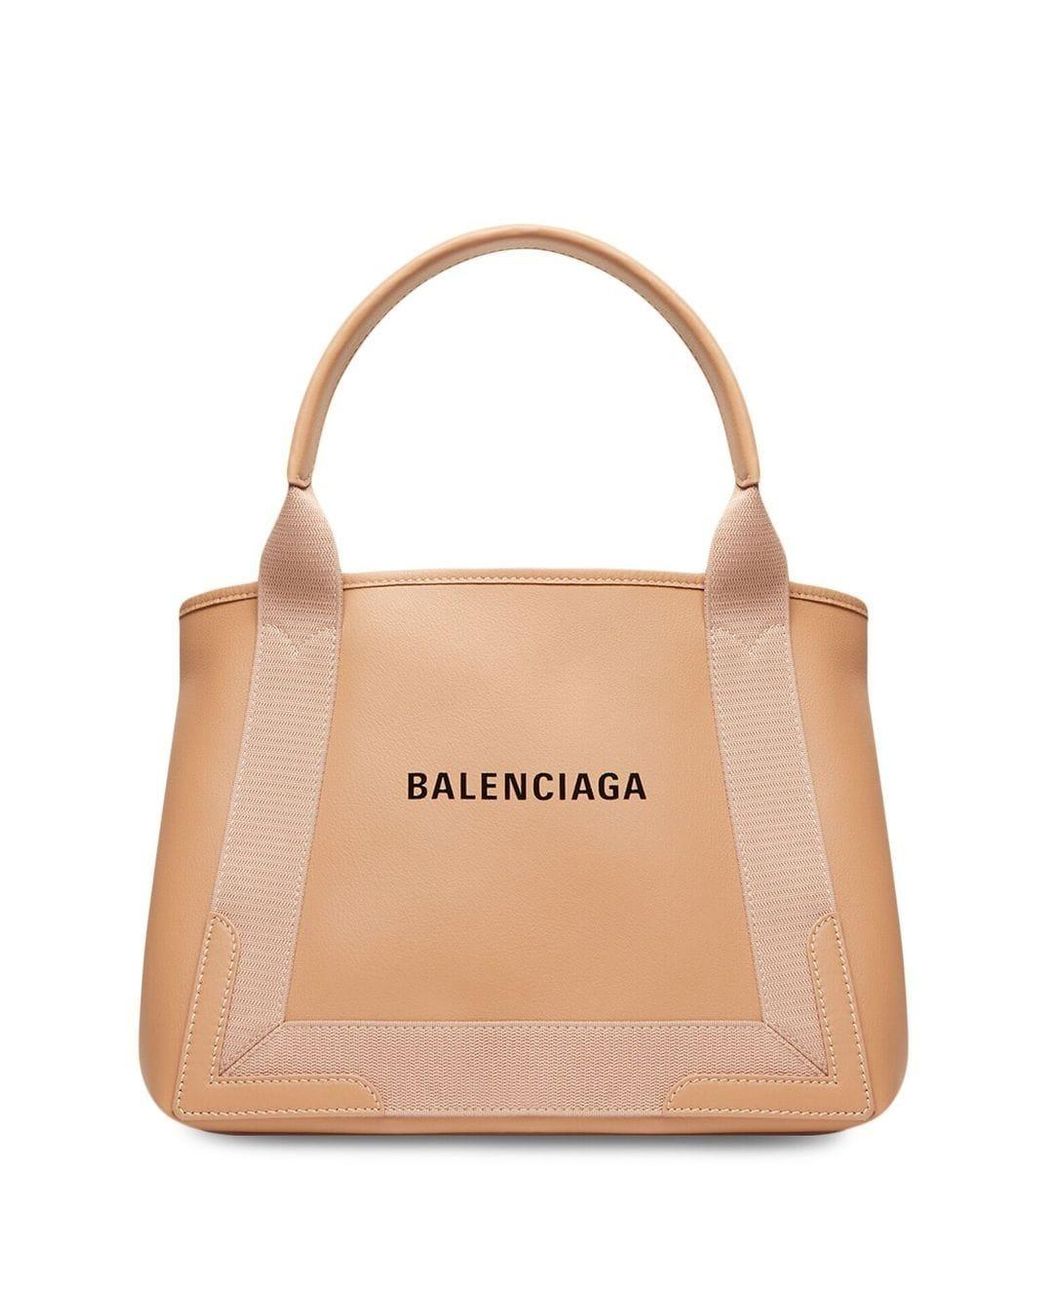 Balenciaga Cabas Leather Tote in Natural Lyst